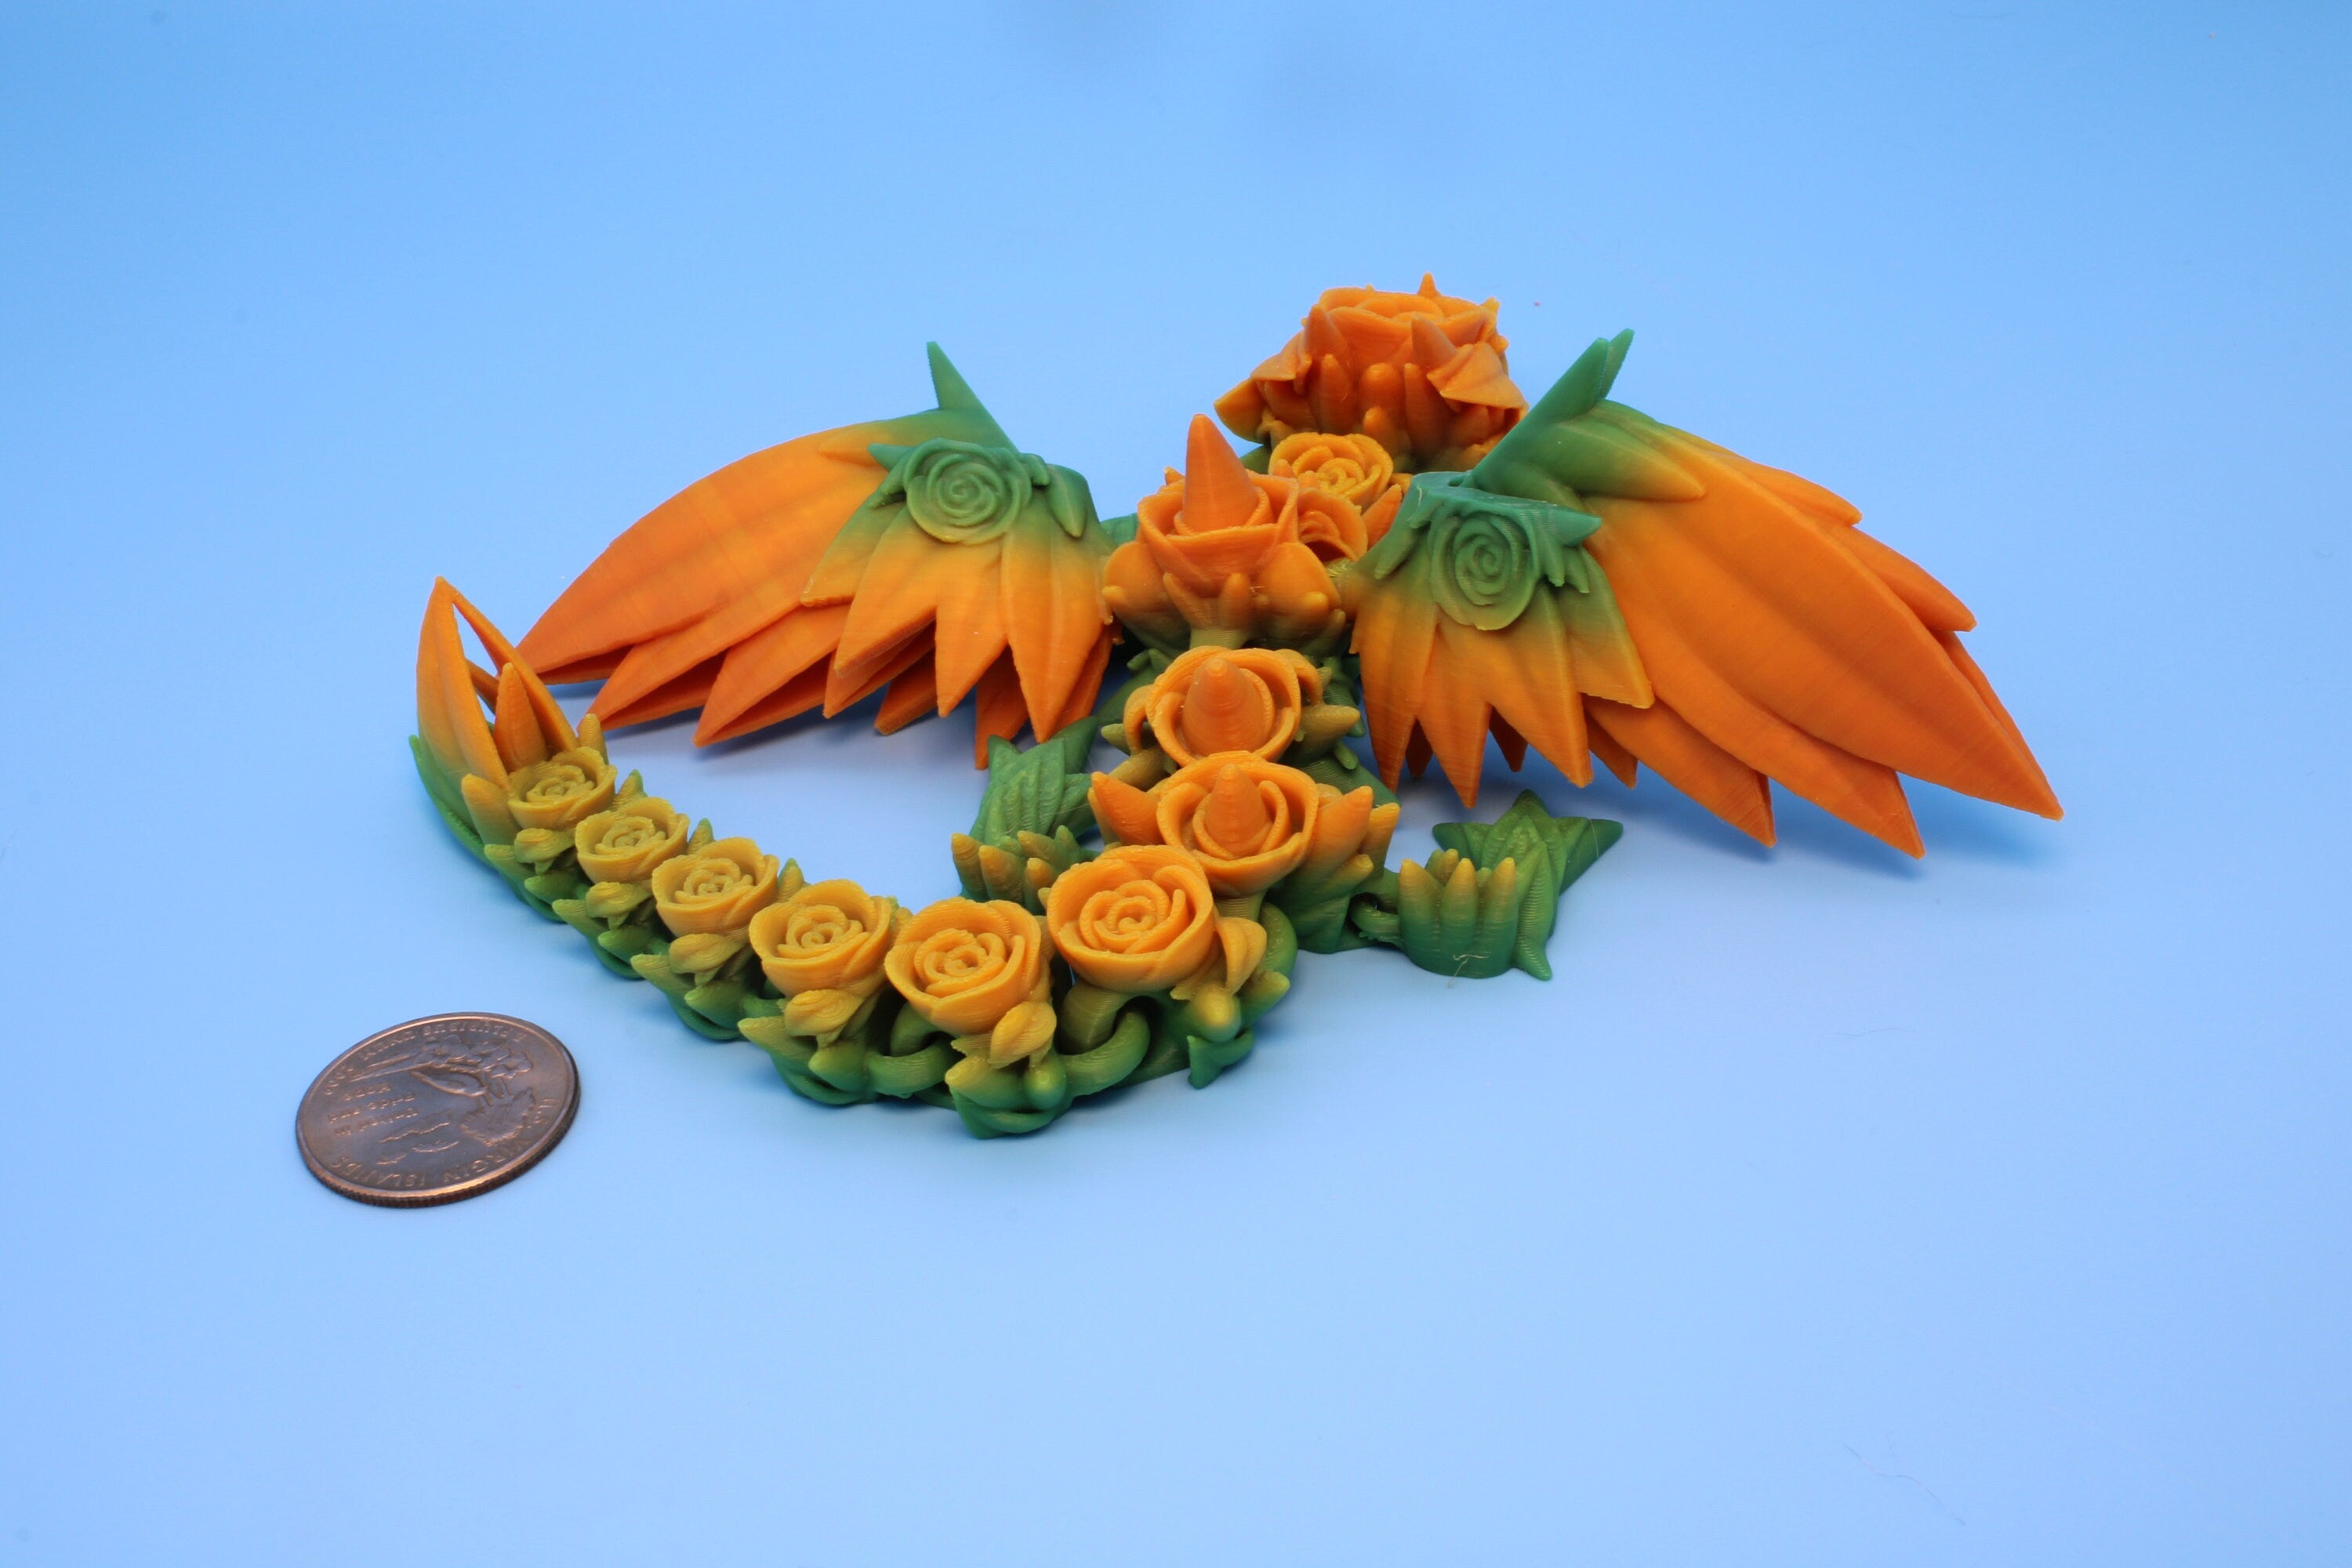 Baby Rose Wing Dragon | Yellow & Green | 3D Printed | Fidget | Flexi Toy 8.5 in. | Stress Relief Gift